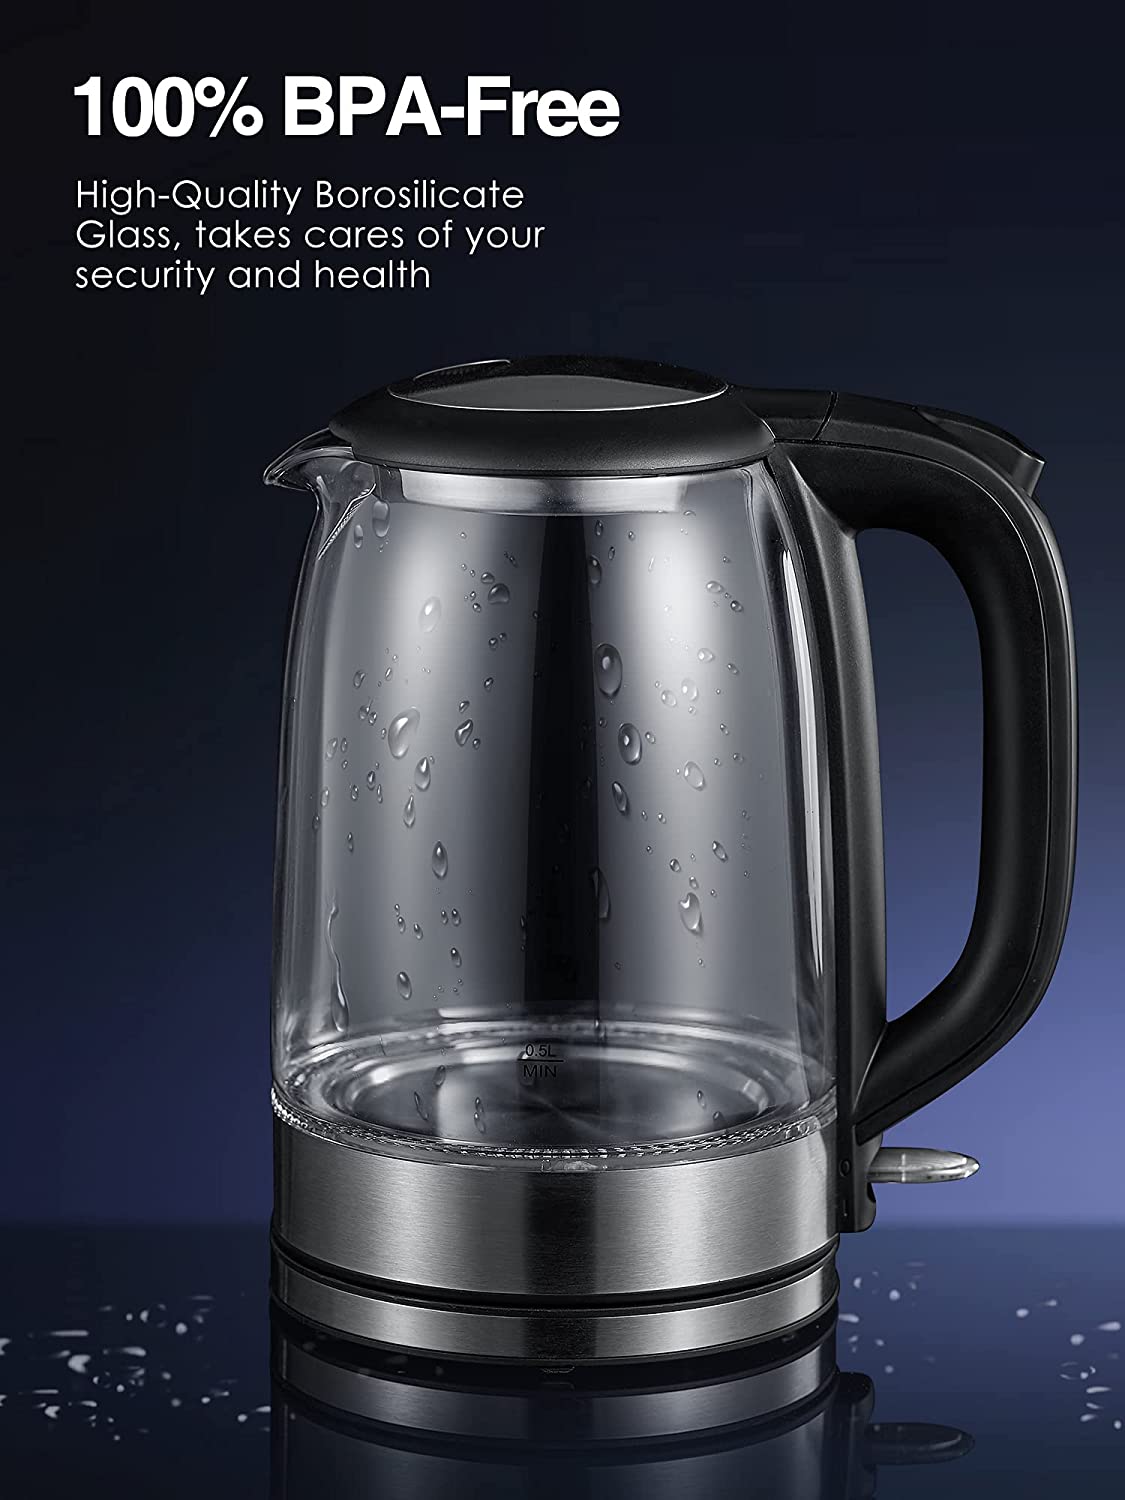 Kettle 1.7L Glass Kettle with LED Indicator Lights, Fast Boil Tea Electric Kettle with Auto Shut-Off & Boil-Dry Protection, Stainless Steel Lid & Bottom, BPA Free